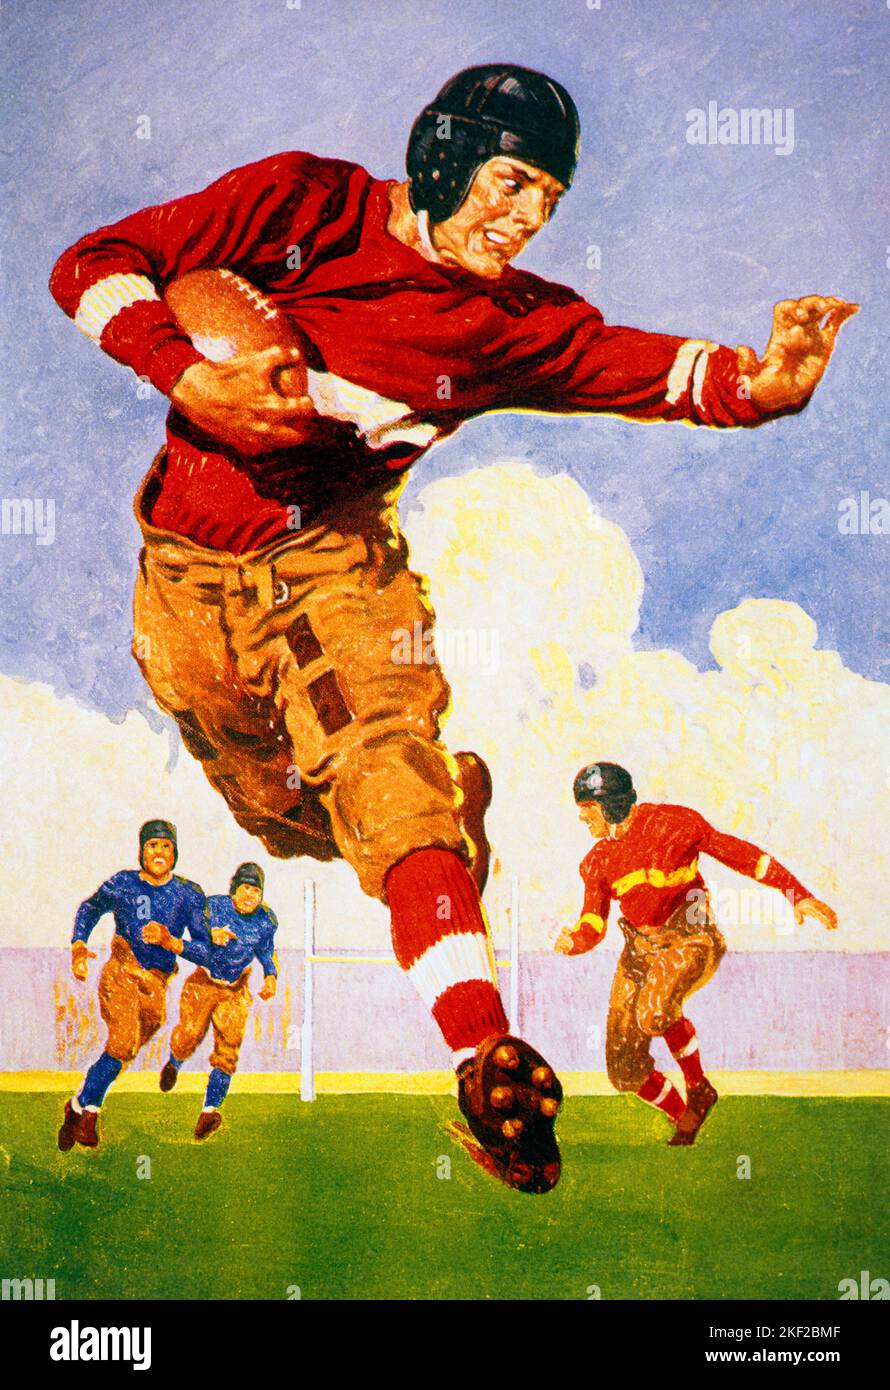 1920s ILLUSTRATION BY J F KERNAN OF AMERICAN FOOTBALL PLAYER OUTRUNNING OTHER TEAM AS HE CARRIES THE BALL & FENDS OFF OPPONENTS - kh13571 NAW001 HARS STRATEGY GRIDIRON CONCEPTUAL F J BLOCKING PEP TEAM SPORT HE CARRIES DEFENSE OPPONENTS YOUNG ADULT MAN & AMERICAN FOOTBALL OFFENSE OLD FASHIONED Stock Photo